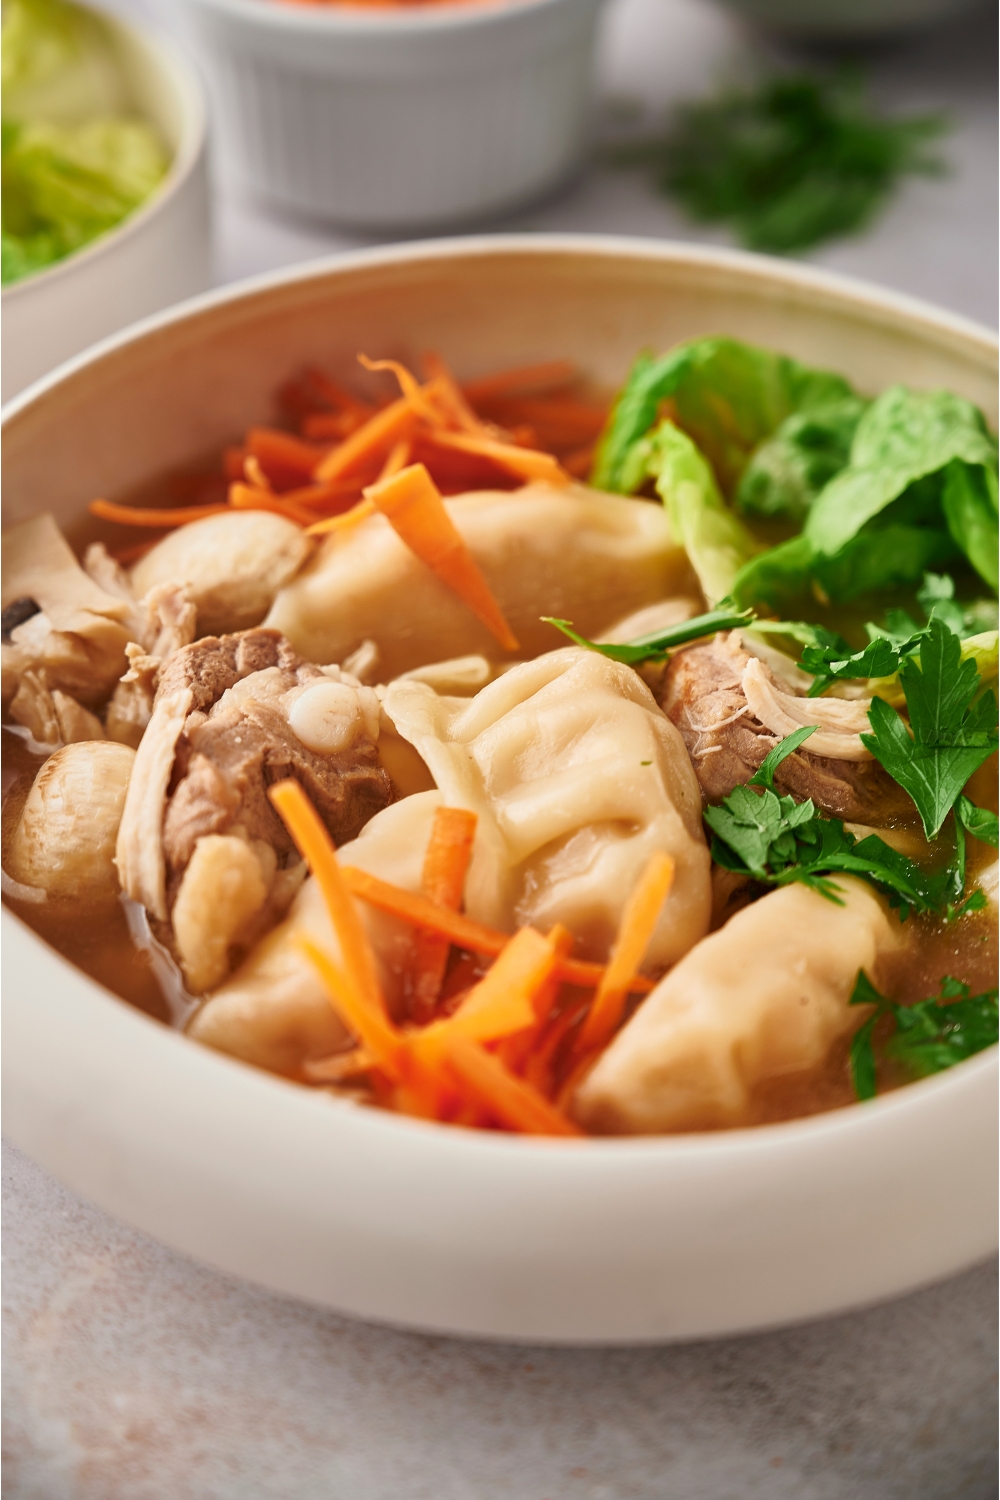 Wontons, lettuce, carrots, and chicken in a bowl of broth.